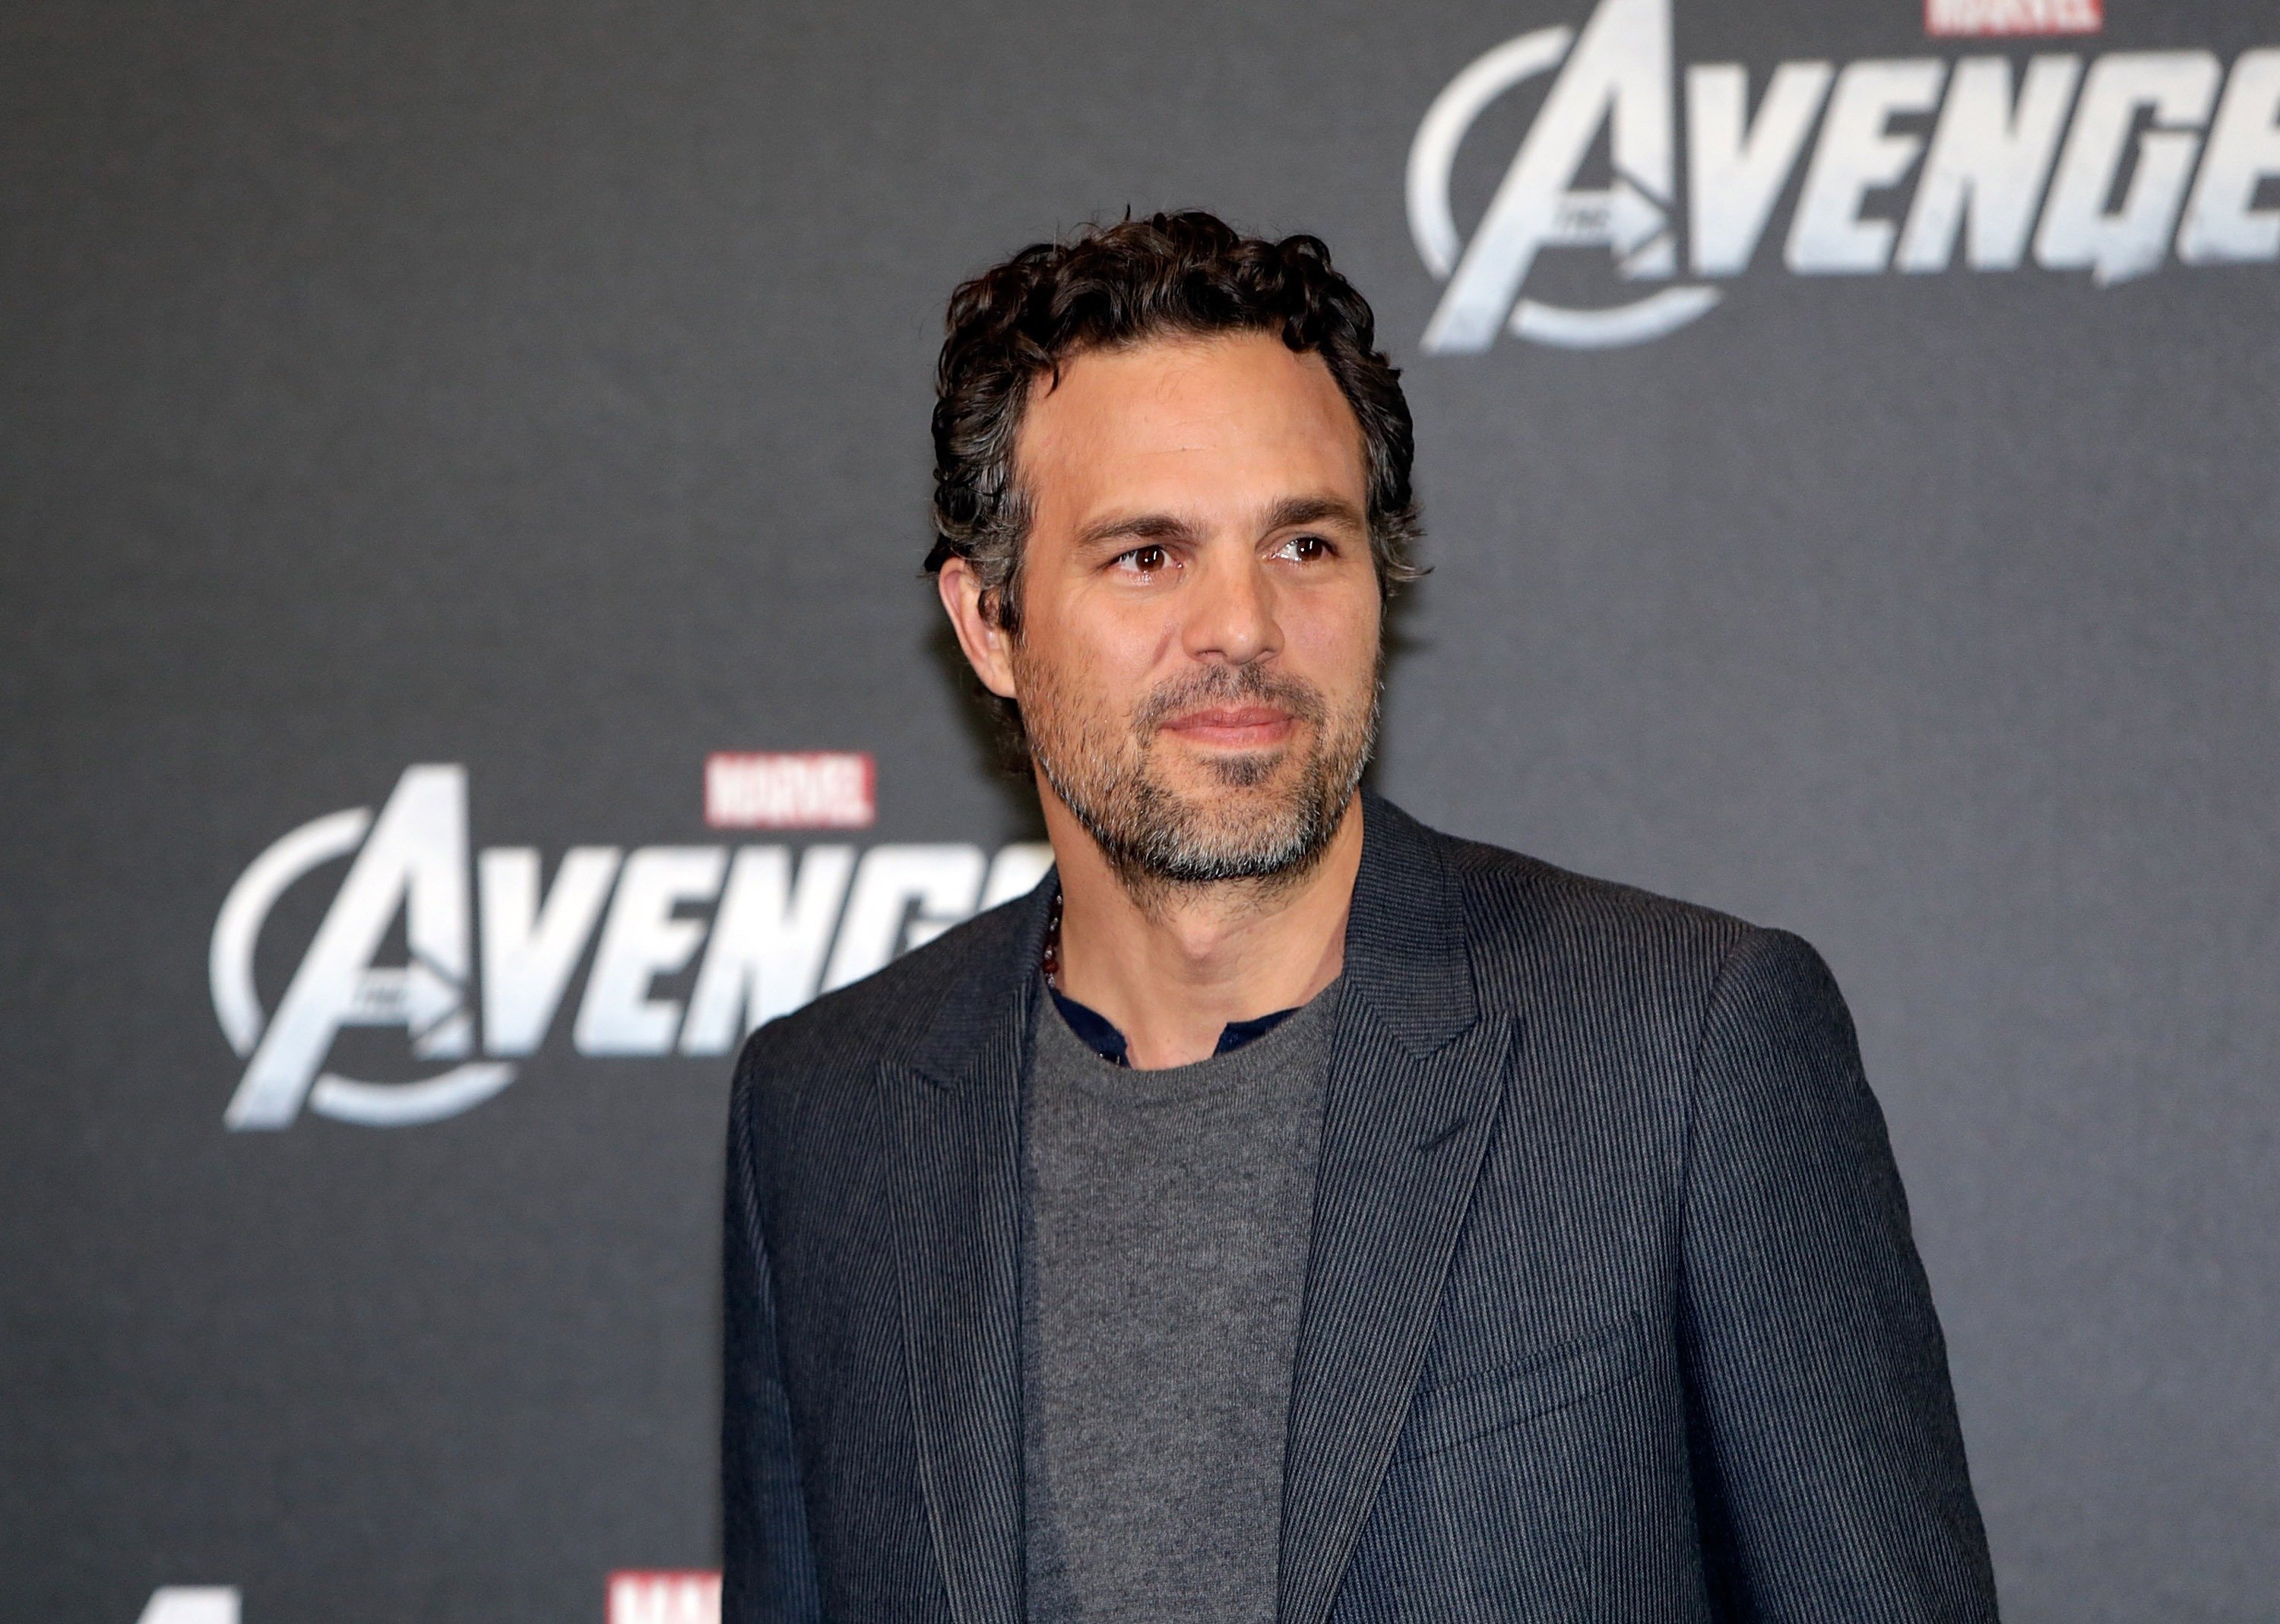 Mark Ruffalo attends the photocall of Marvel's "The Avengers" at Ritz Carlton on April 23, 2012 in Berlin, Germany | Photo: Getty Images